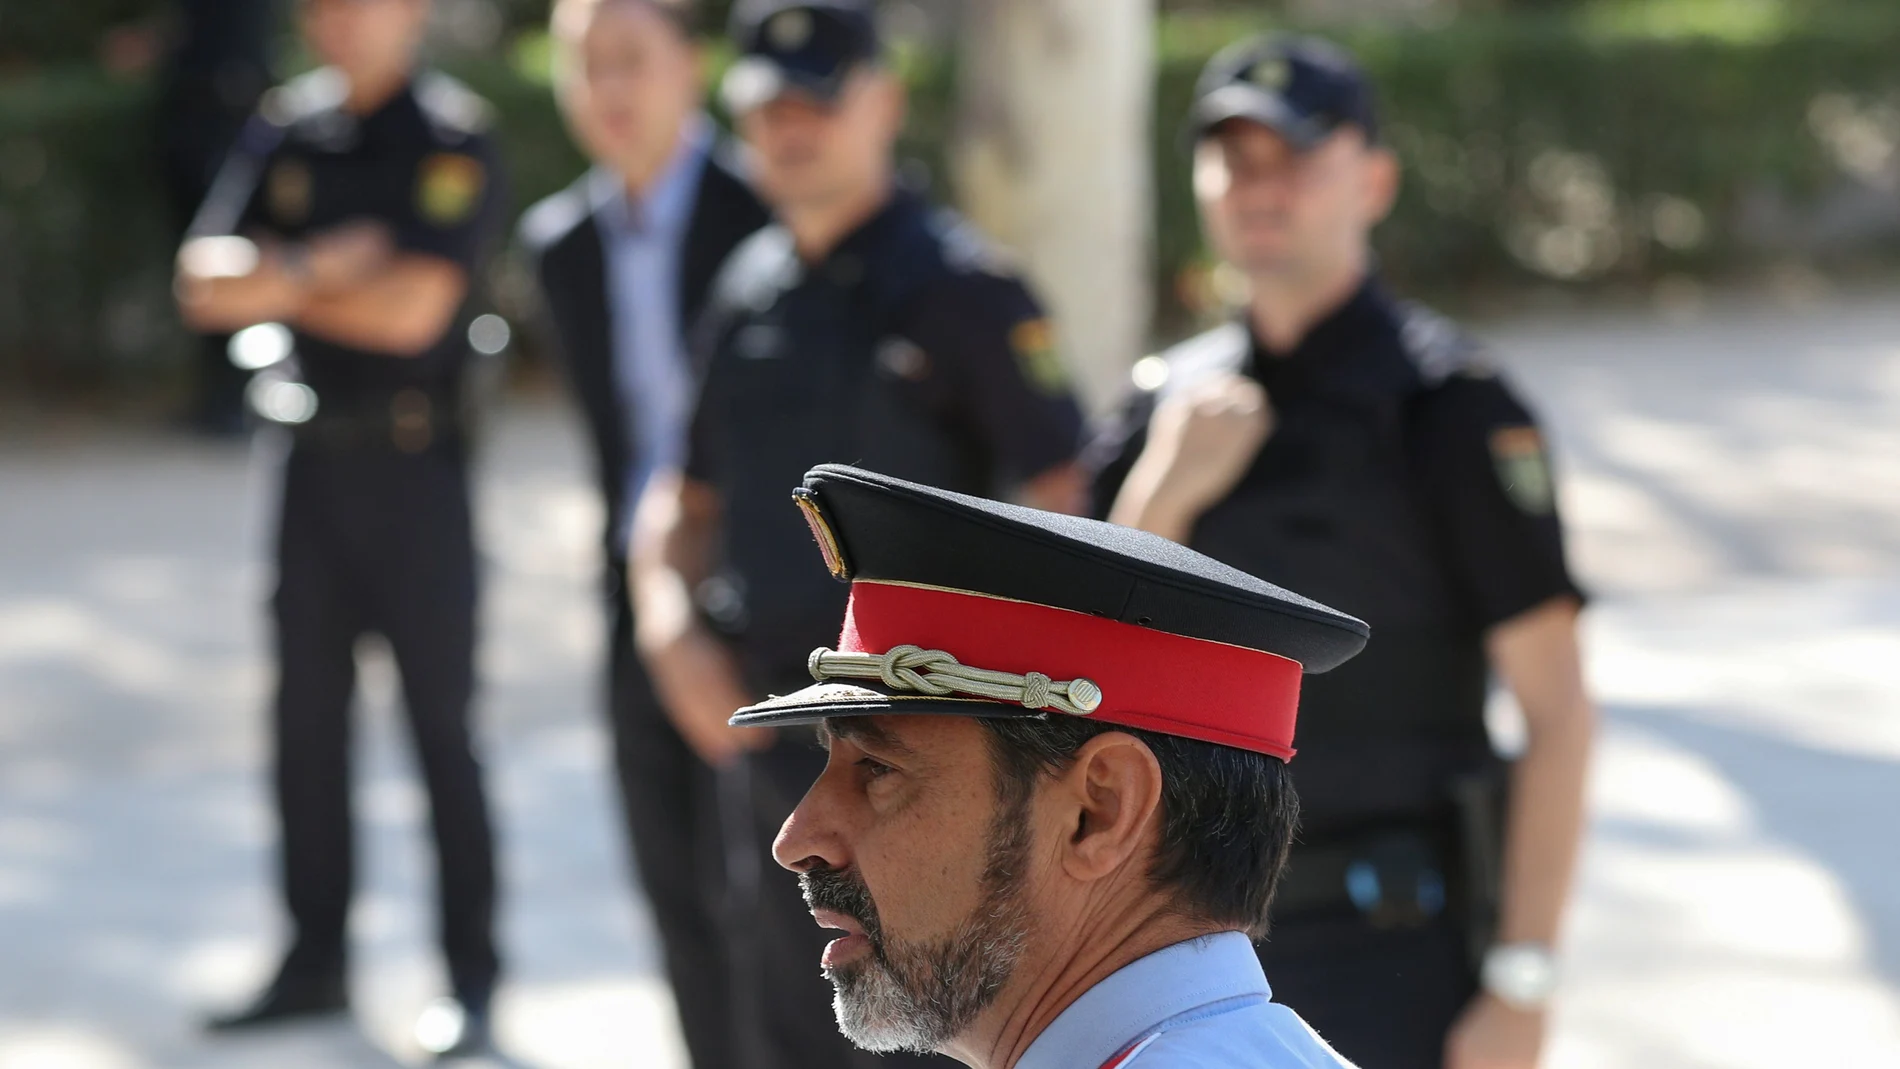 Josep Lluis Trapero, the head of Catalan police, walks past National Police officers as he leaves the Spain's High Court after testifying for the alleged crime of sedition in relation to arrests of high-ranking officials over the organisation of a banned independence vote in Madrid, Spain, October 6, 2017. REUTERS/Sergio Perez